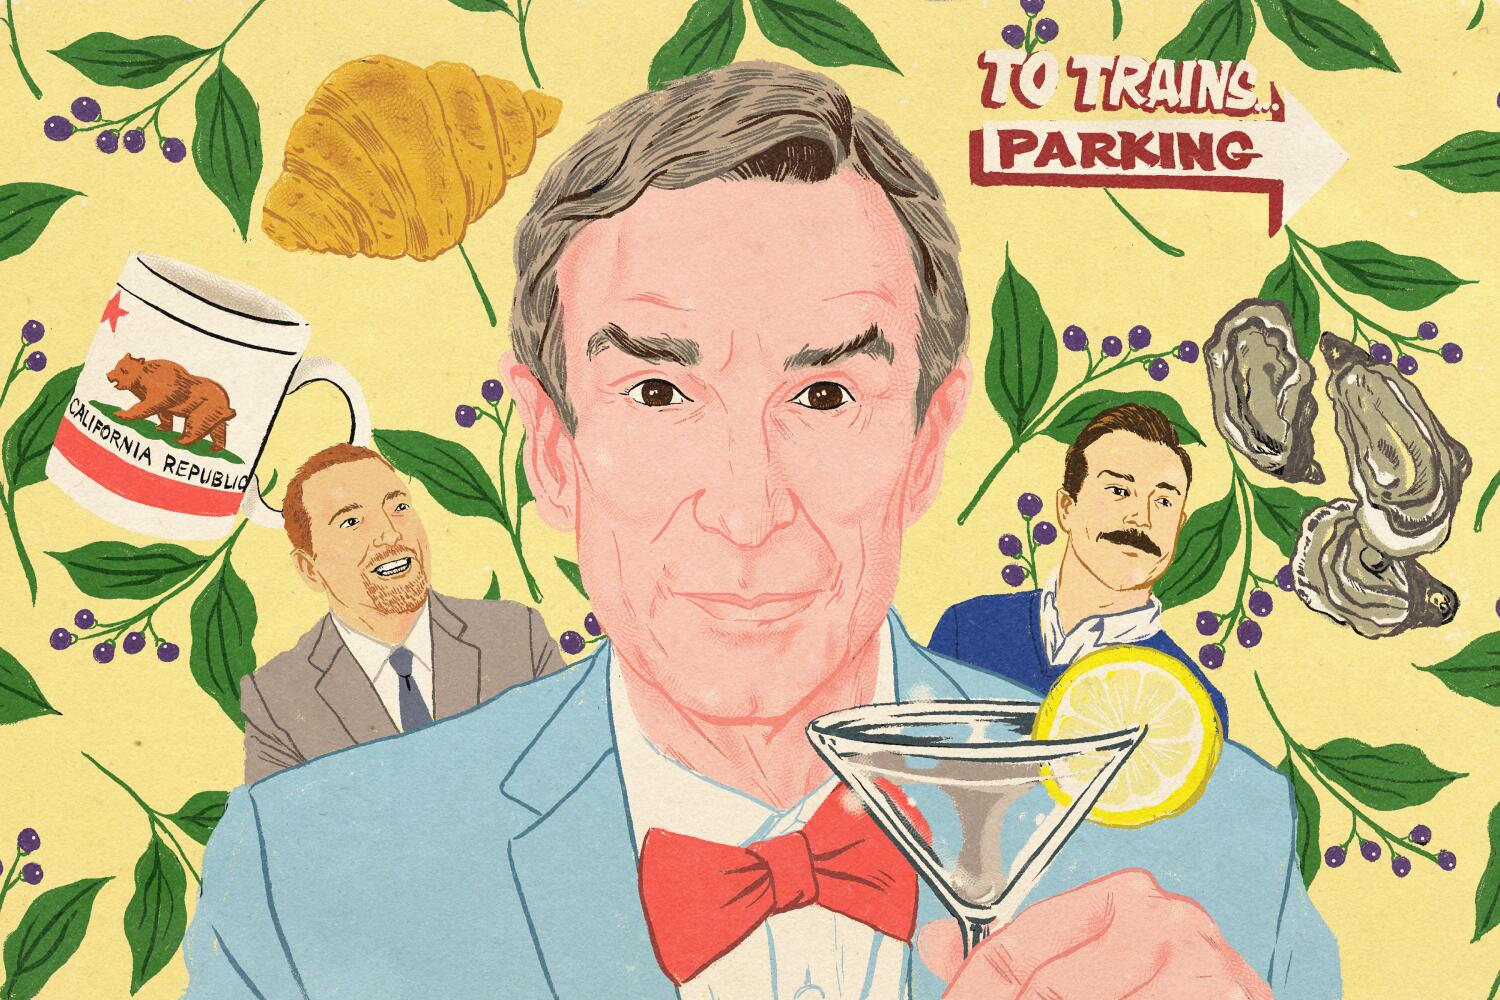 How to have the best Sunday in L.A., according to Bill Nye